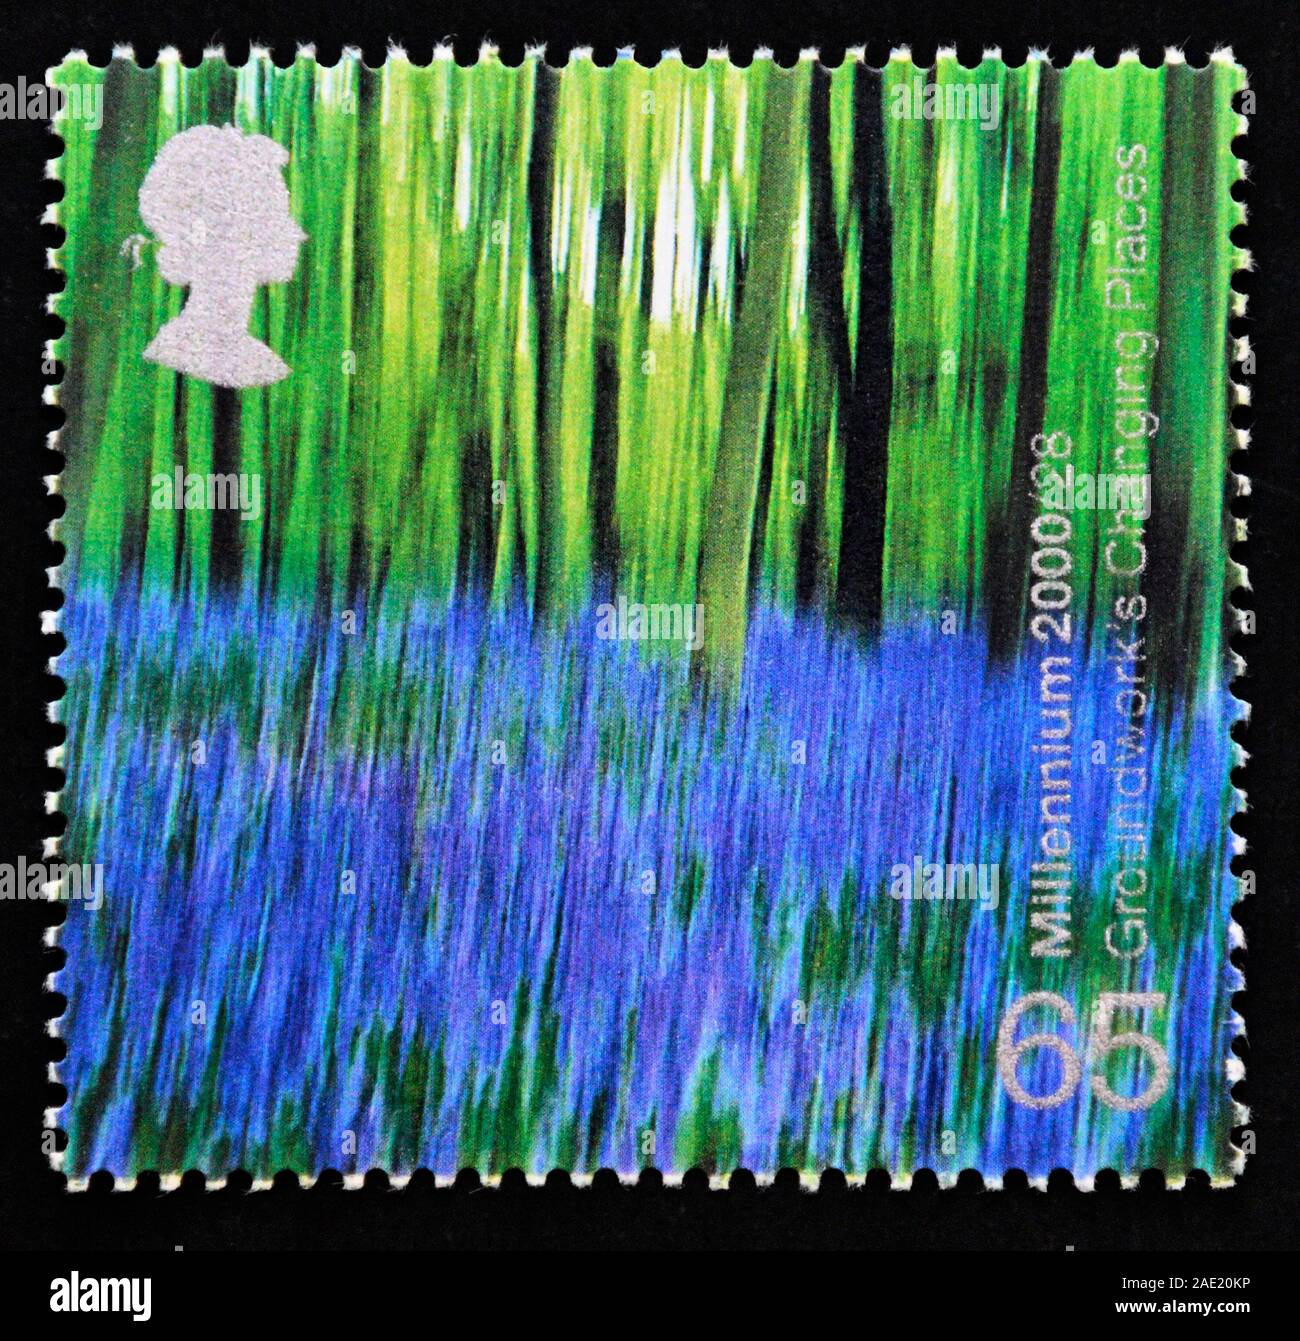 Postage stamp. Great Britain. Queen Elizabeth II. Millenium Projects. 'Stone and Soil'. Bluebell Wood (Groundwork's Changing Places Project). 65p. Stock Photo